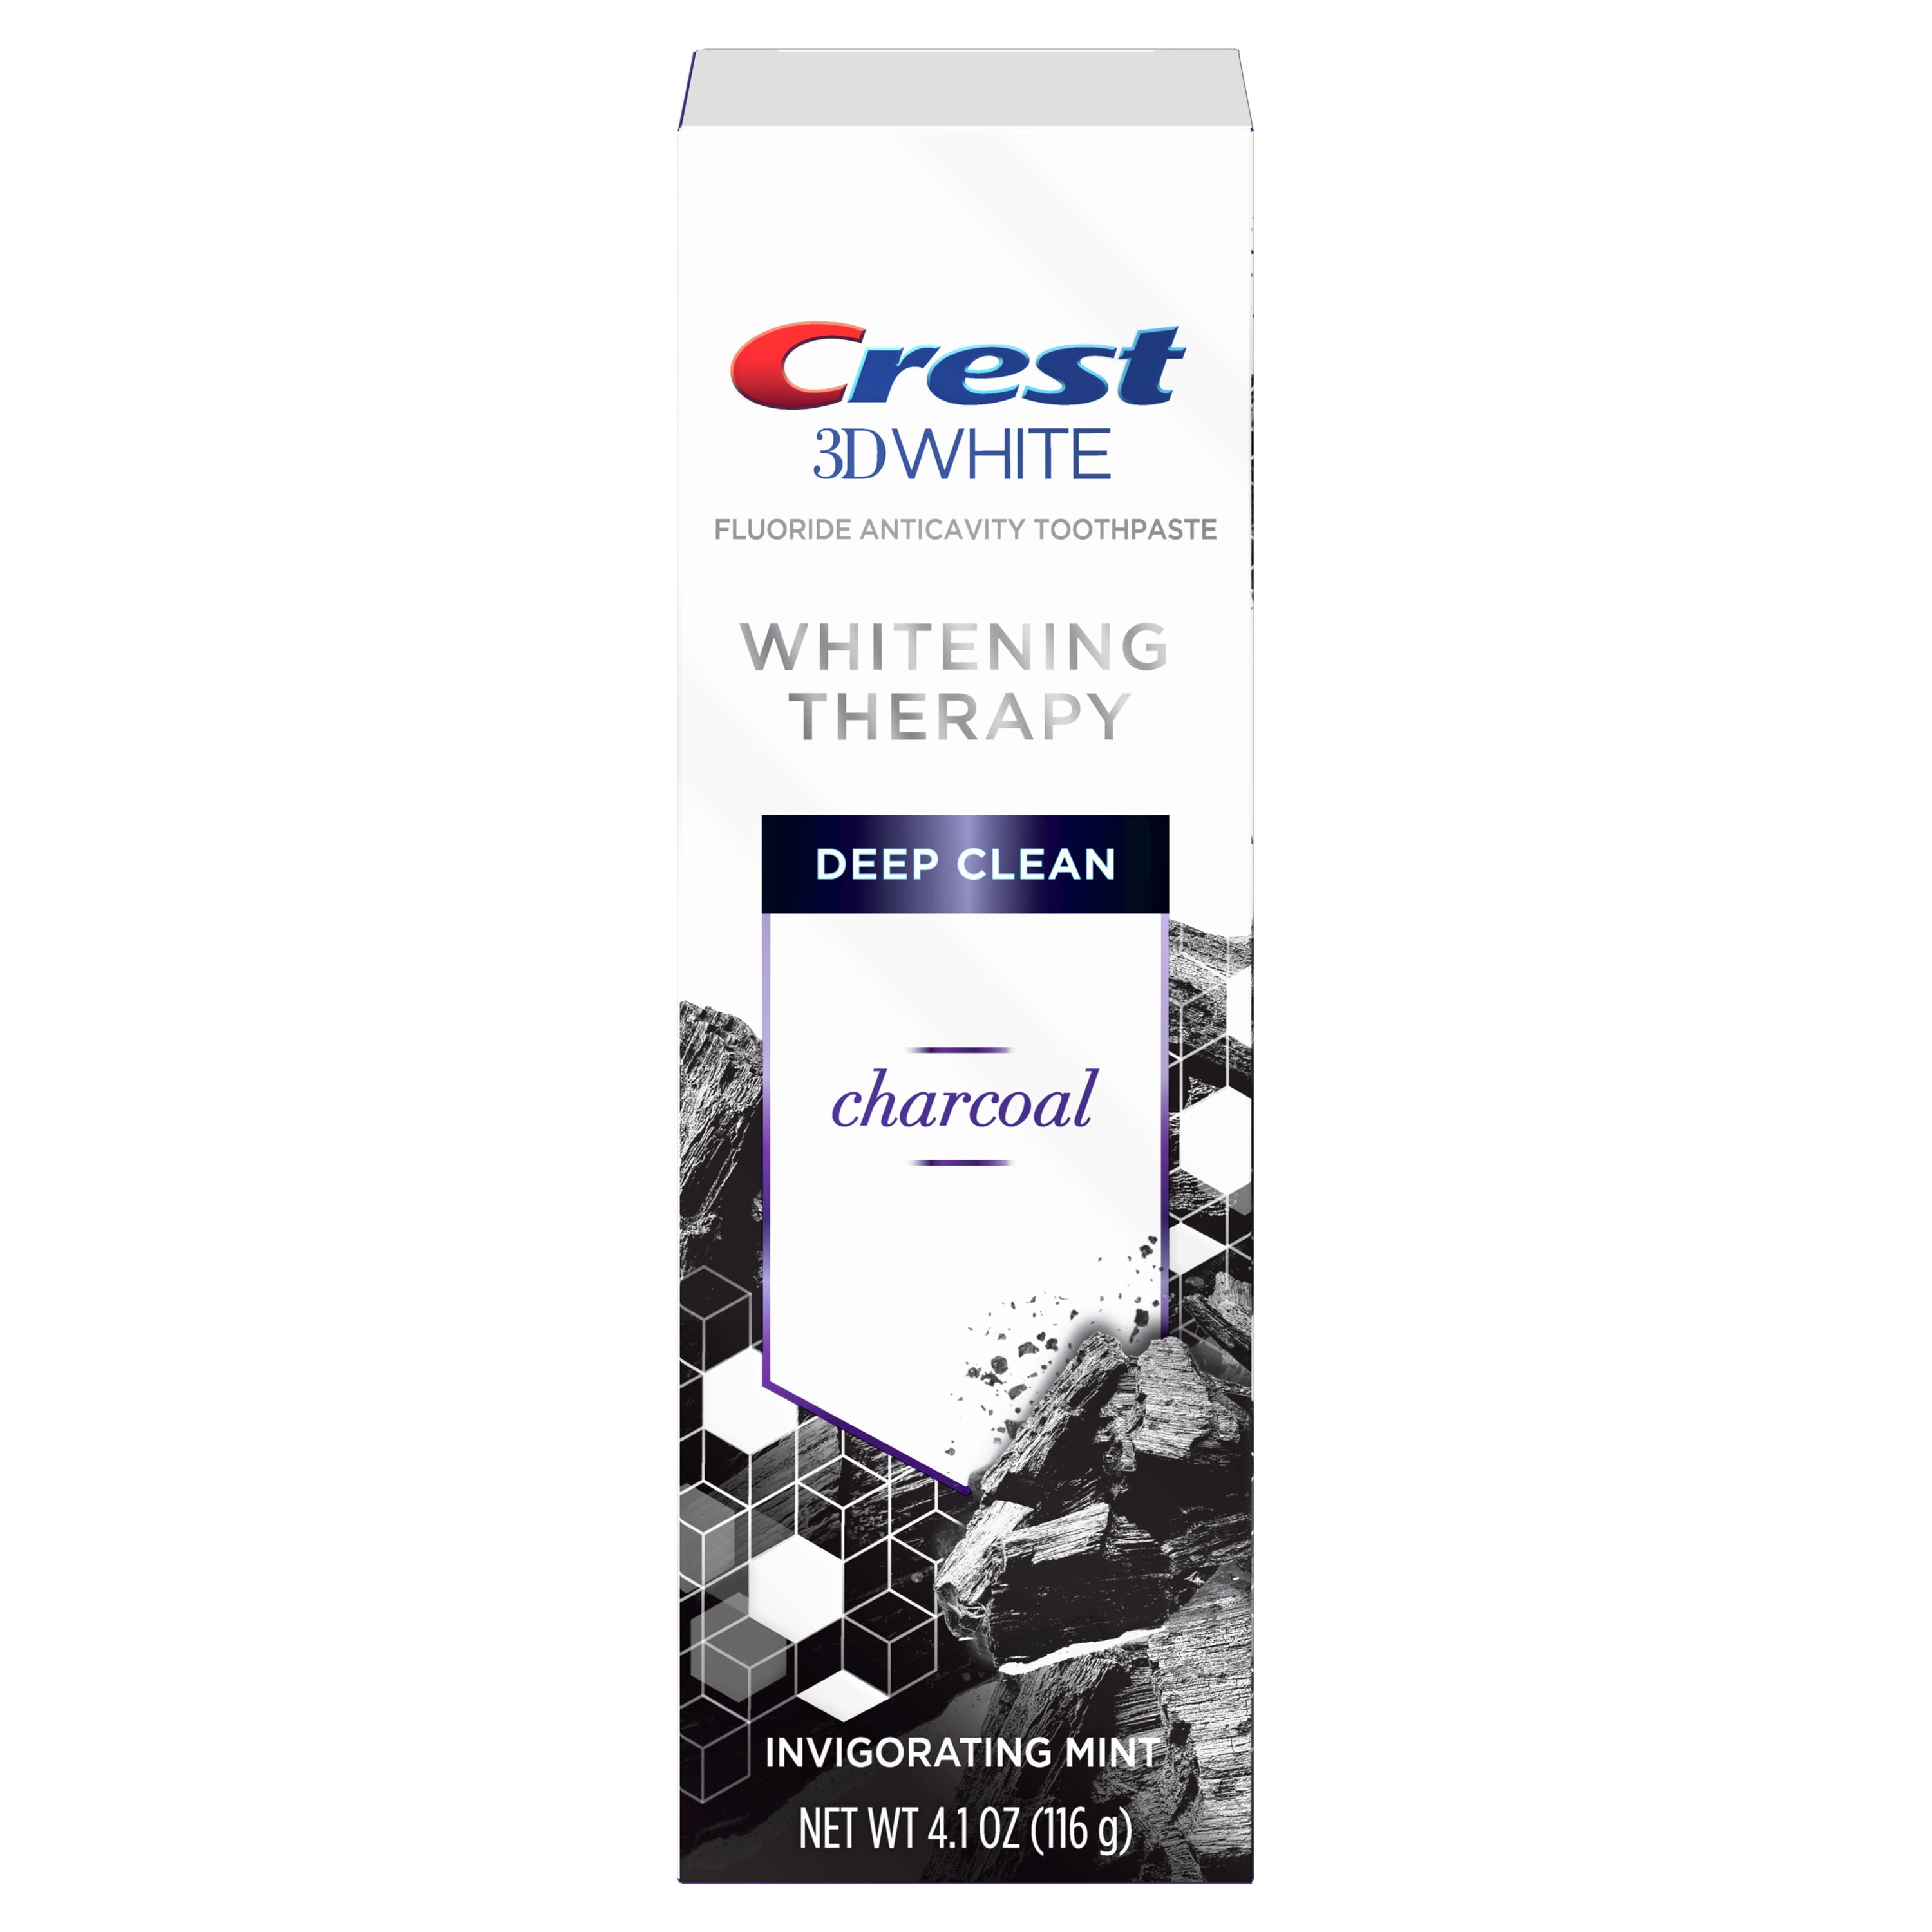 Crest 3D White Whitening Therapy Charcoal Deep Clean Toothpaste, Mint, 4.1 oz